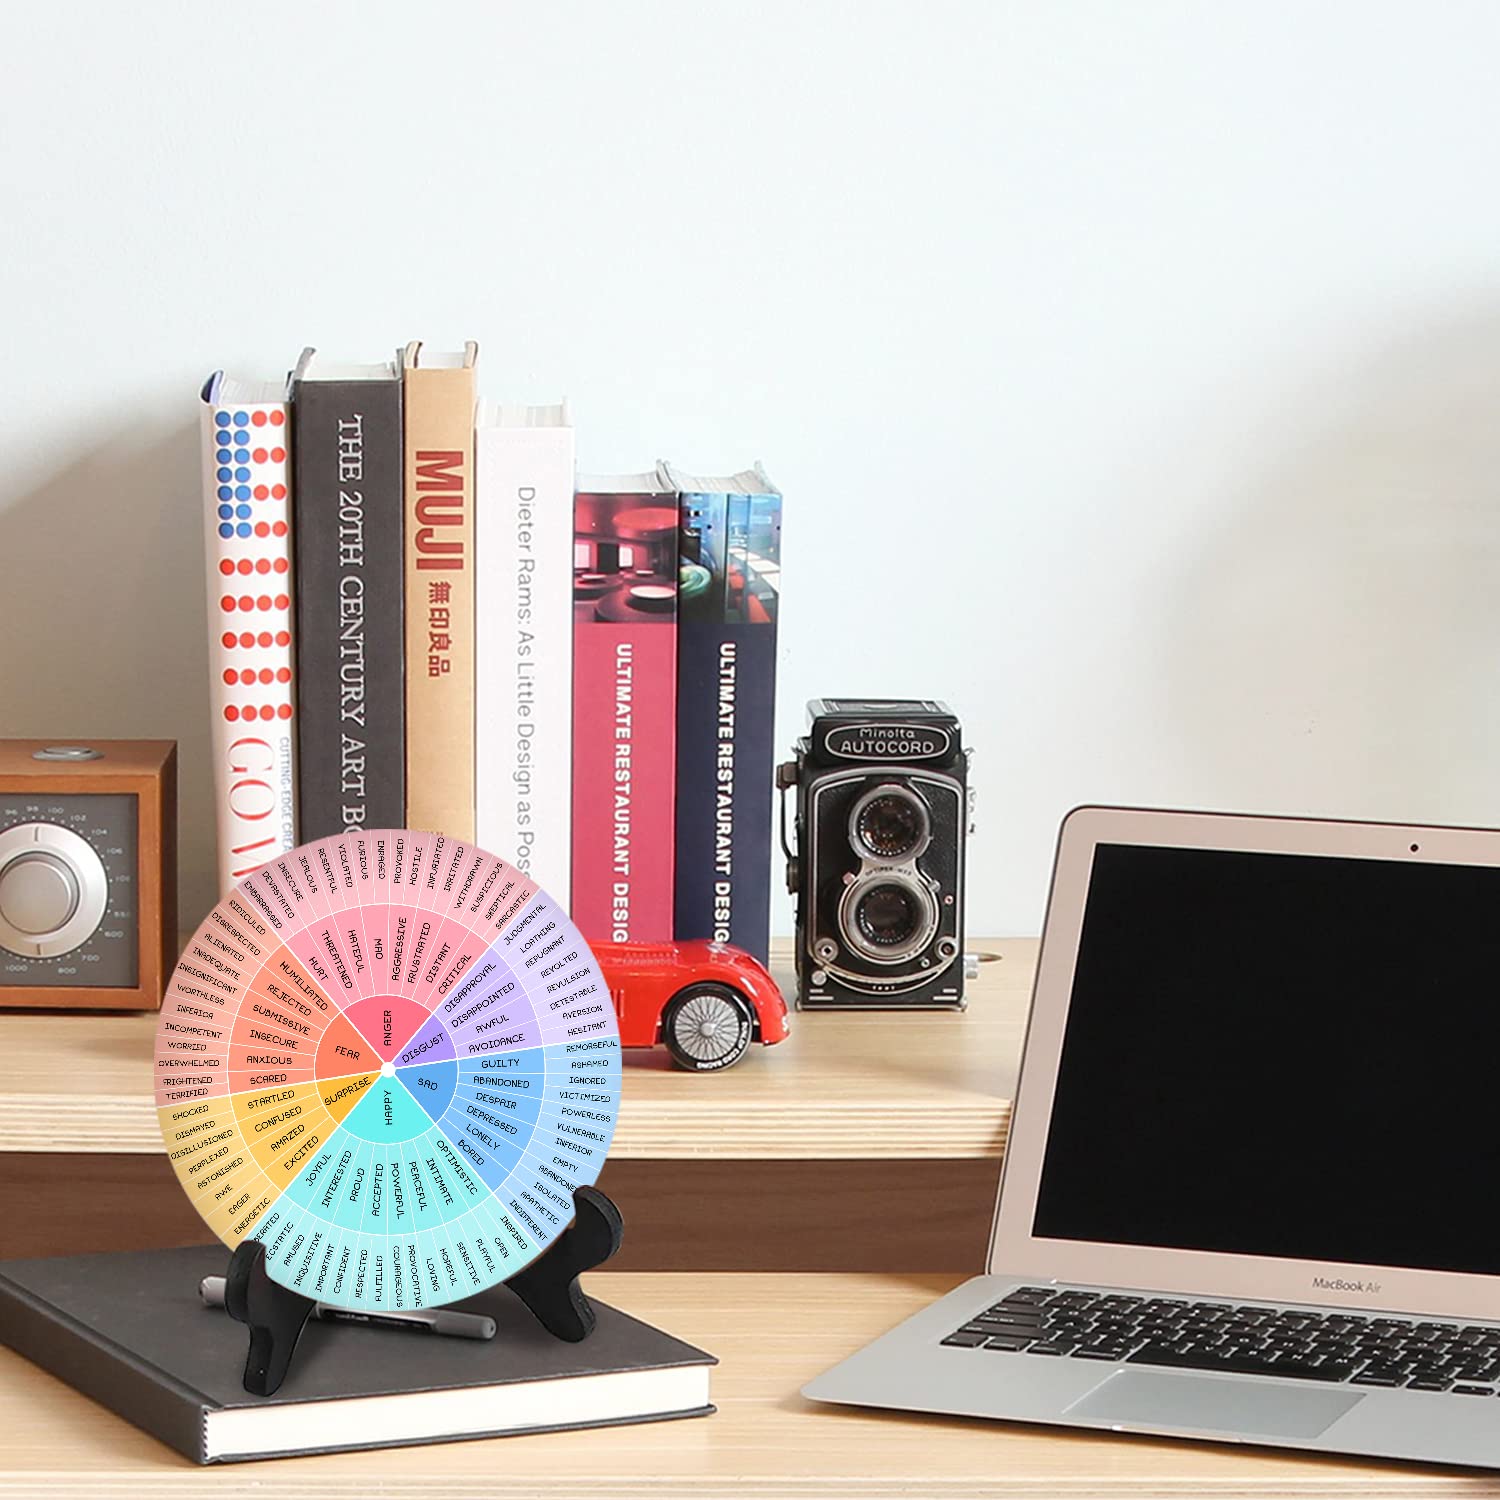 Cool gadgets for creative offices II